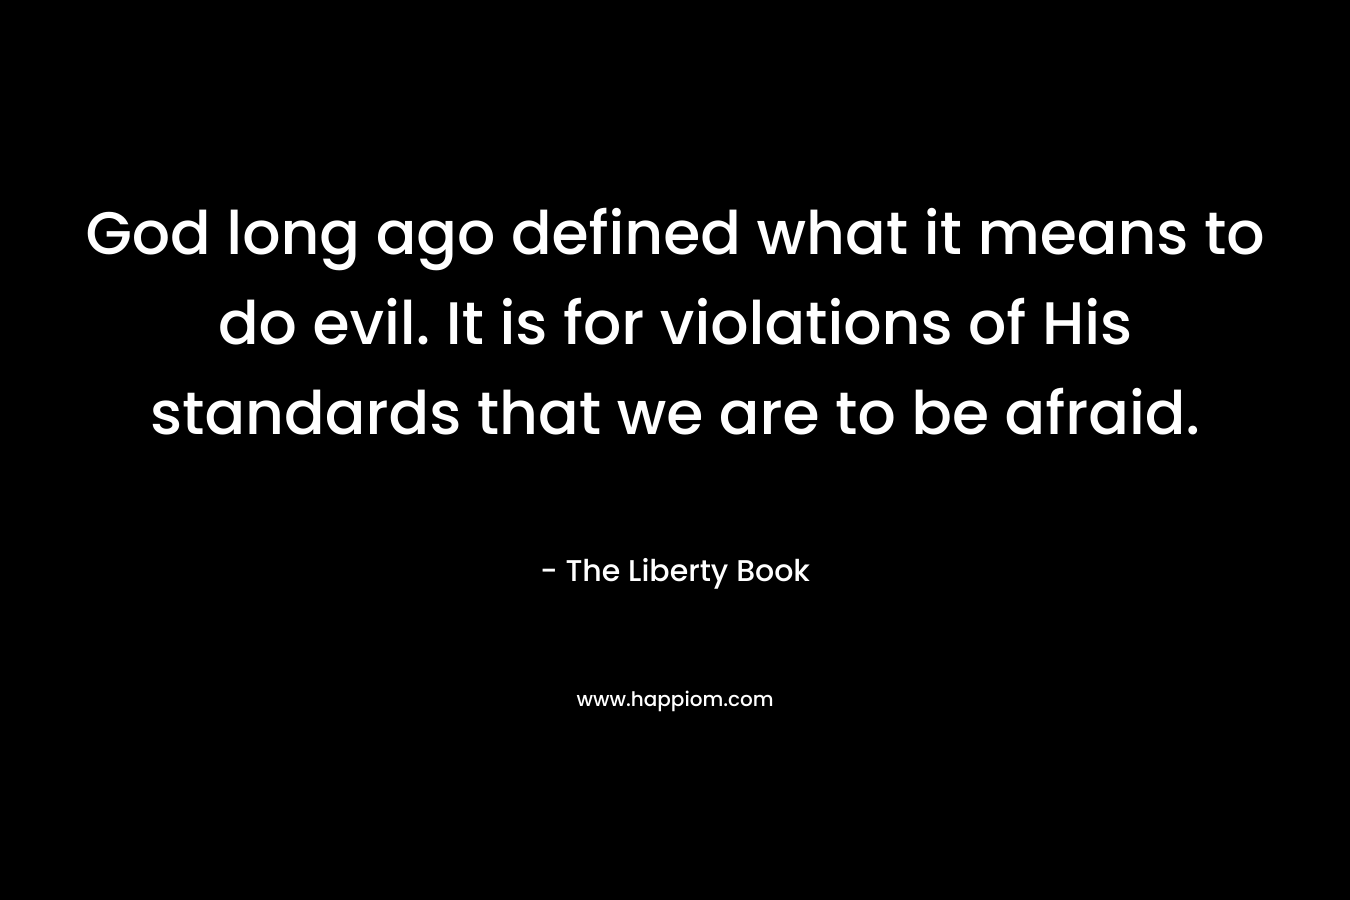 God long ago defined what it means to do evil. It is for violations of His standards that we are to be afraid. – The Liberty Book